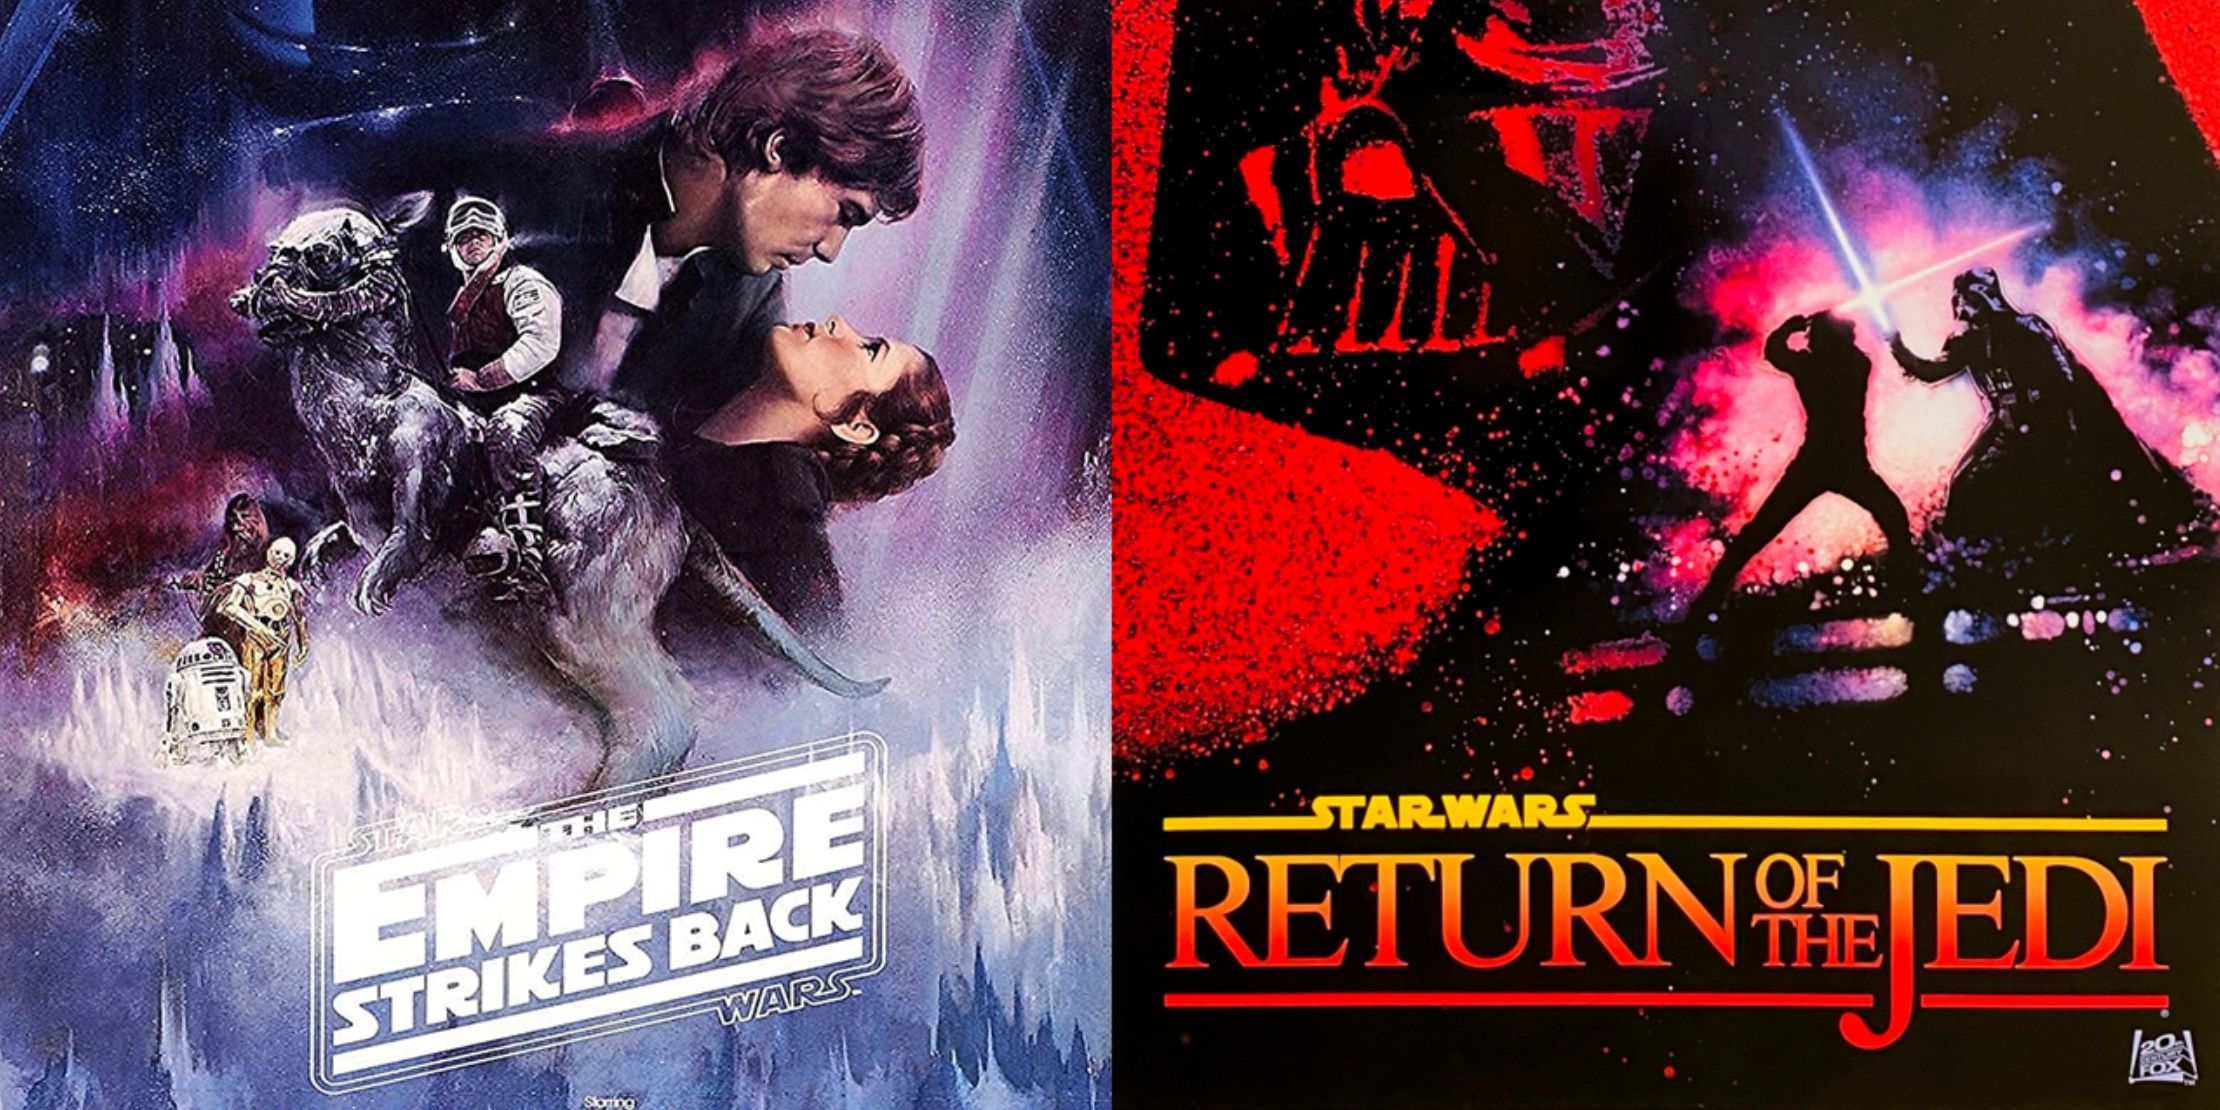 Split image of the posters for The Empire Strikes Back and Return of the Jedi